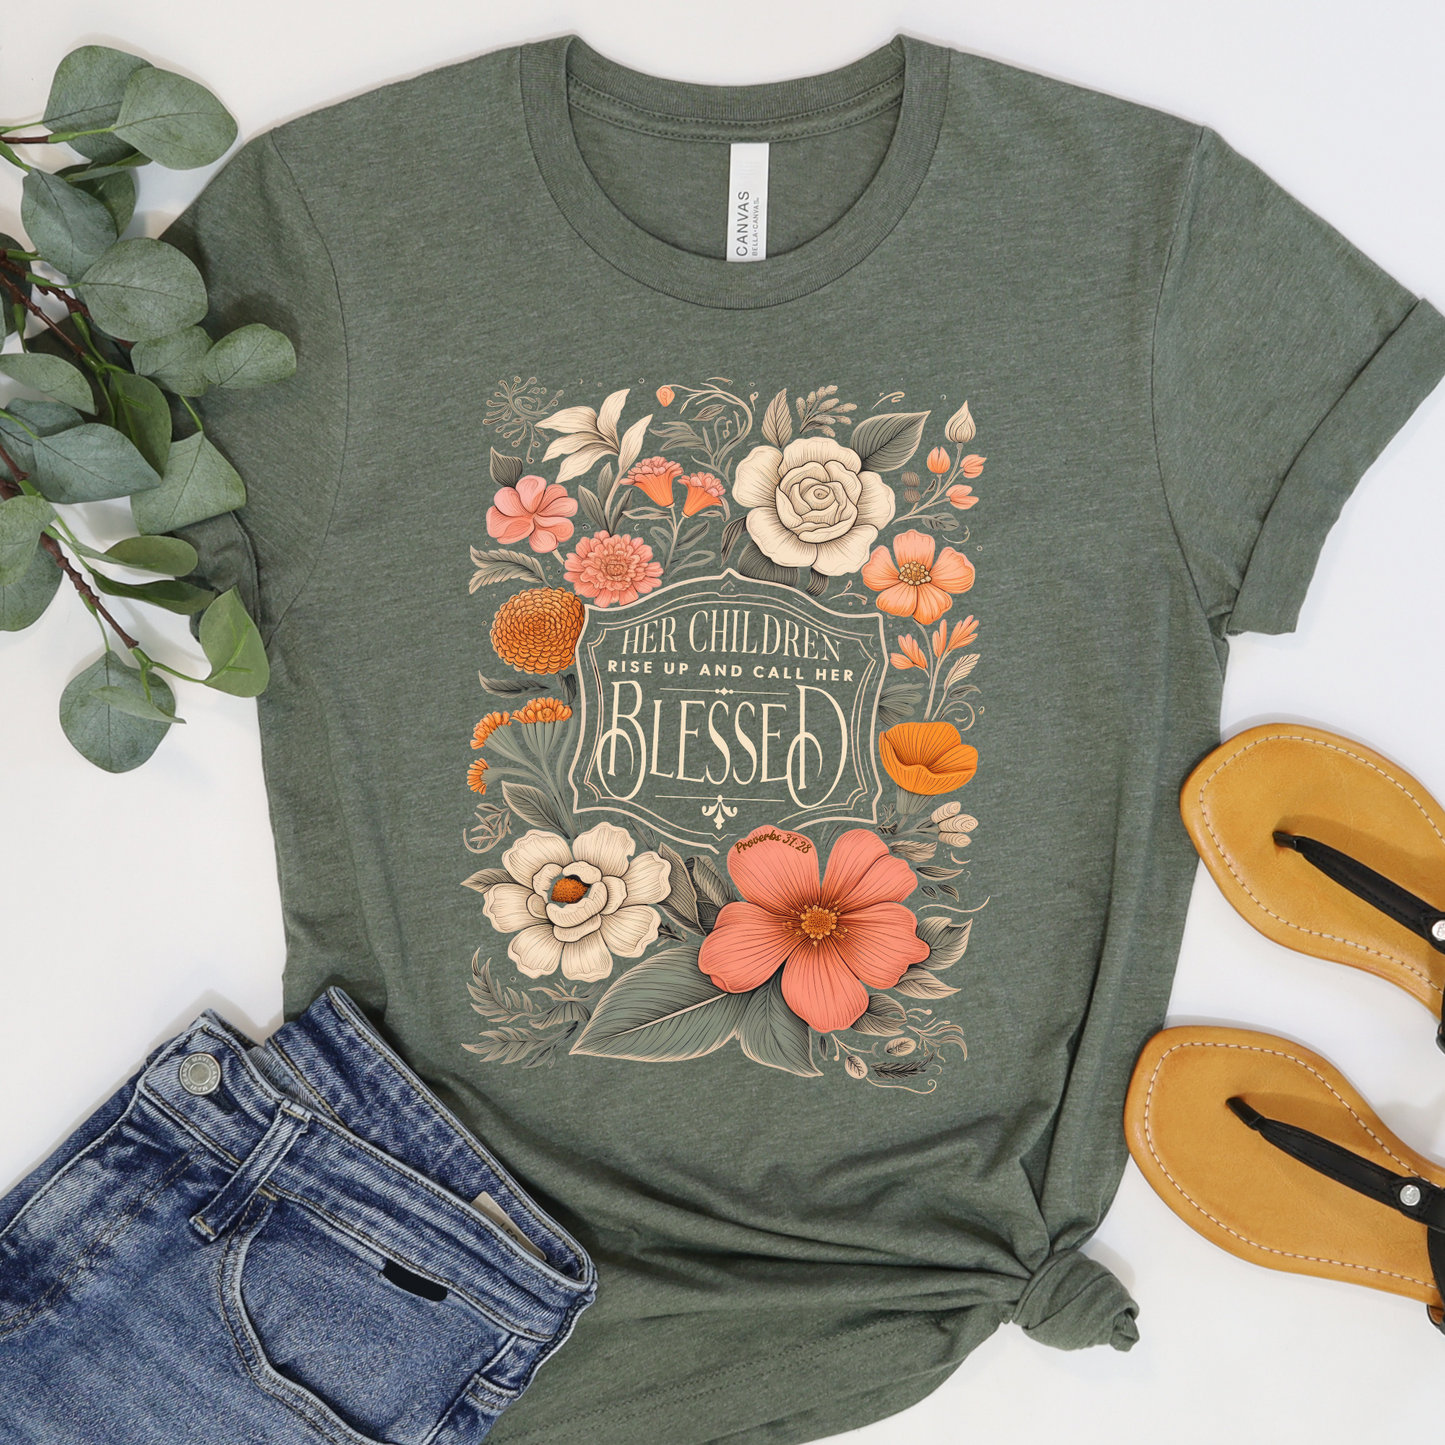 Her children rise up and call her blessed tee - Additional colors